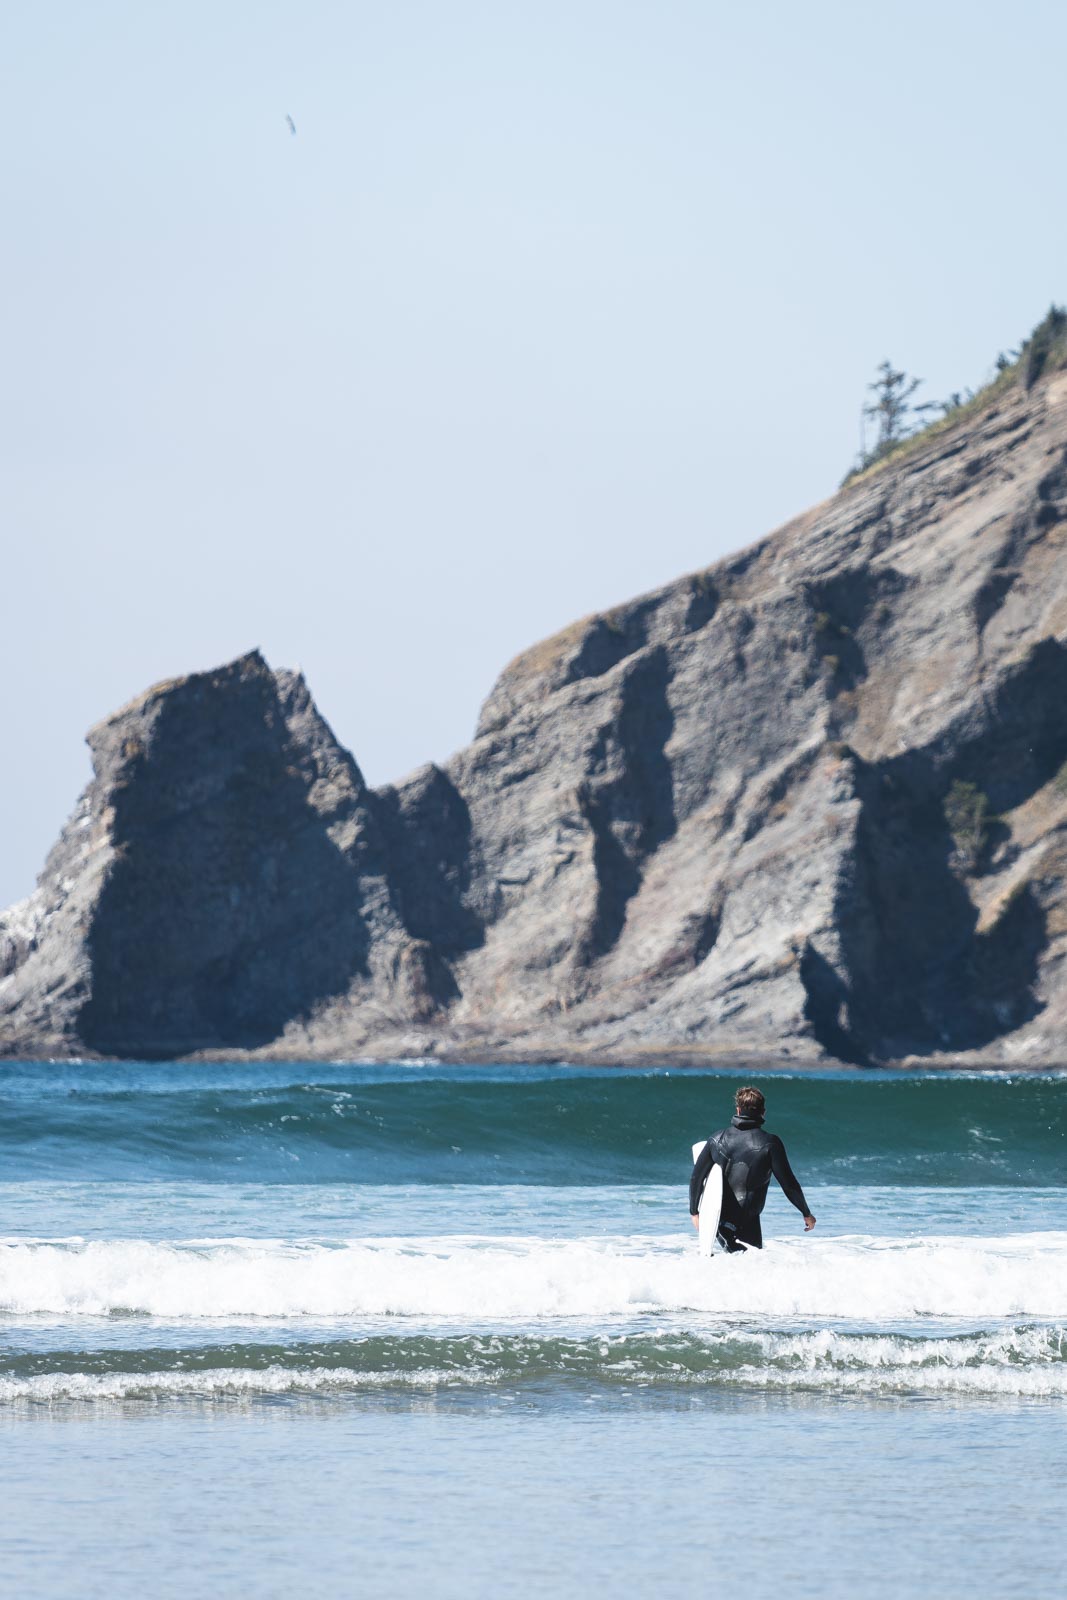 Man holding surfboard in ocean with rocky cliffs in background at Oswald West State Park.